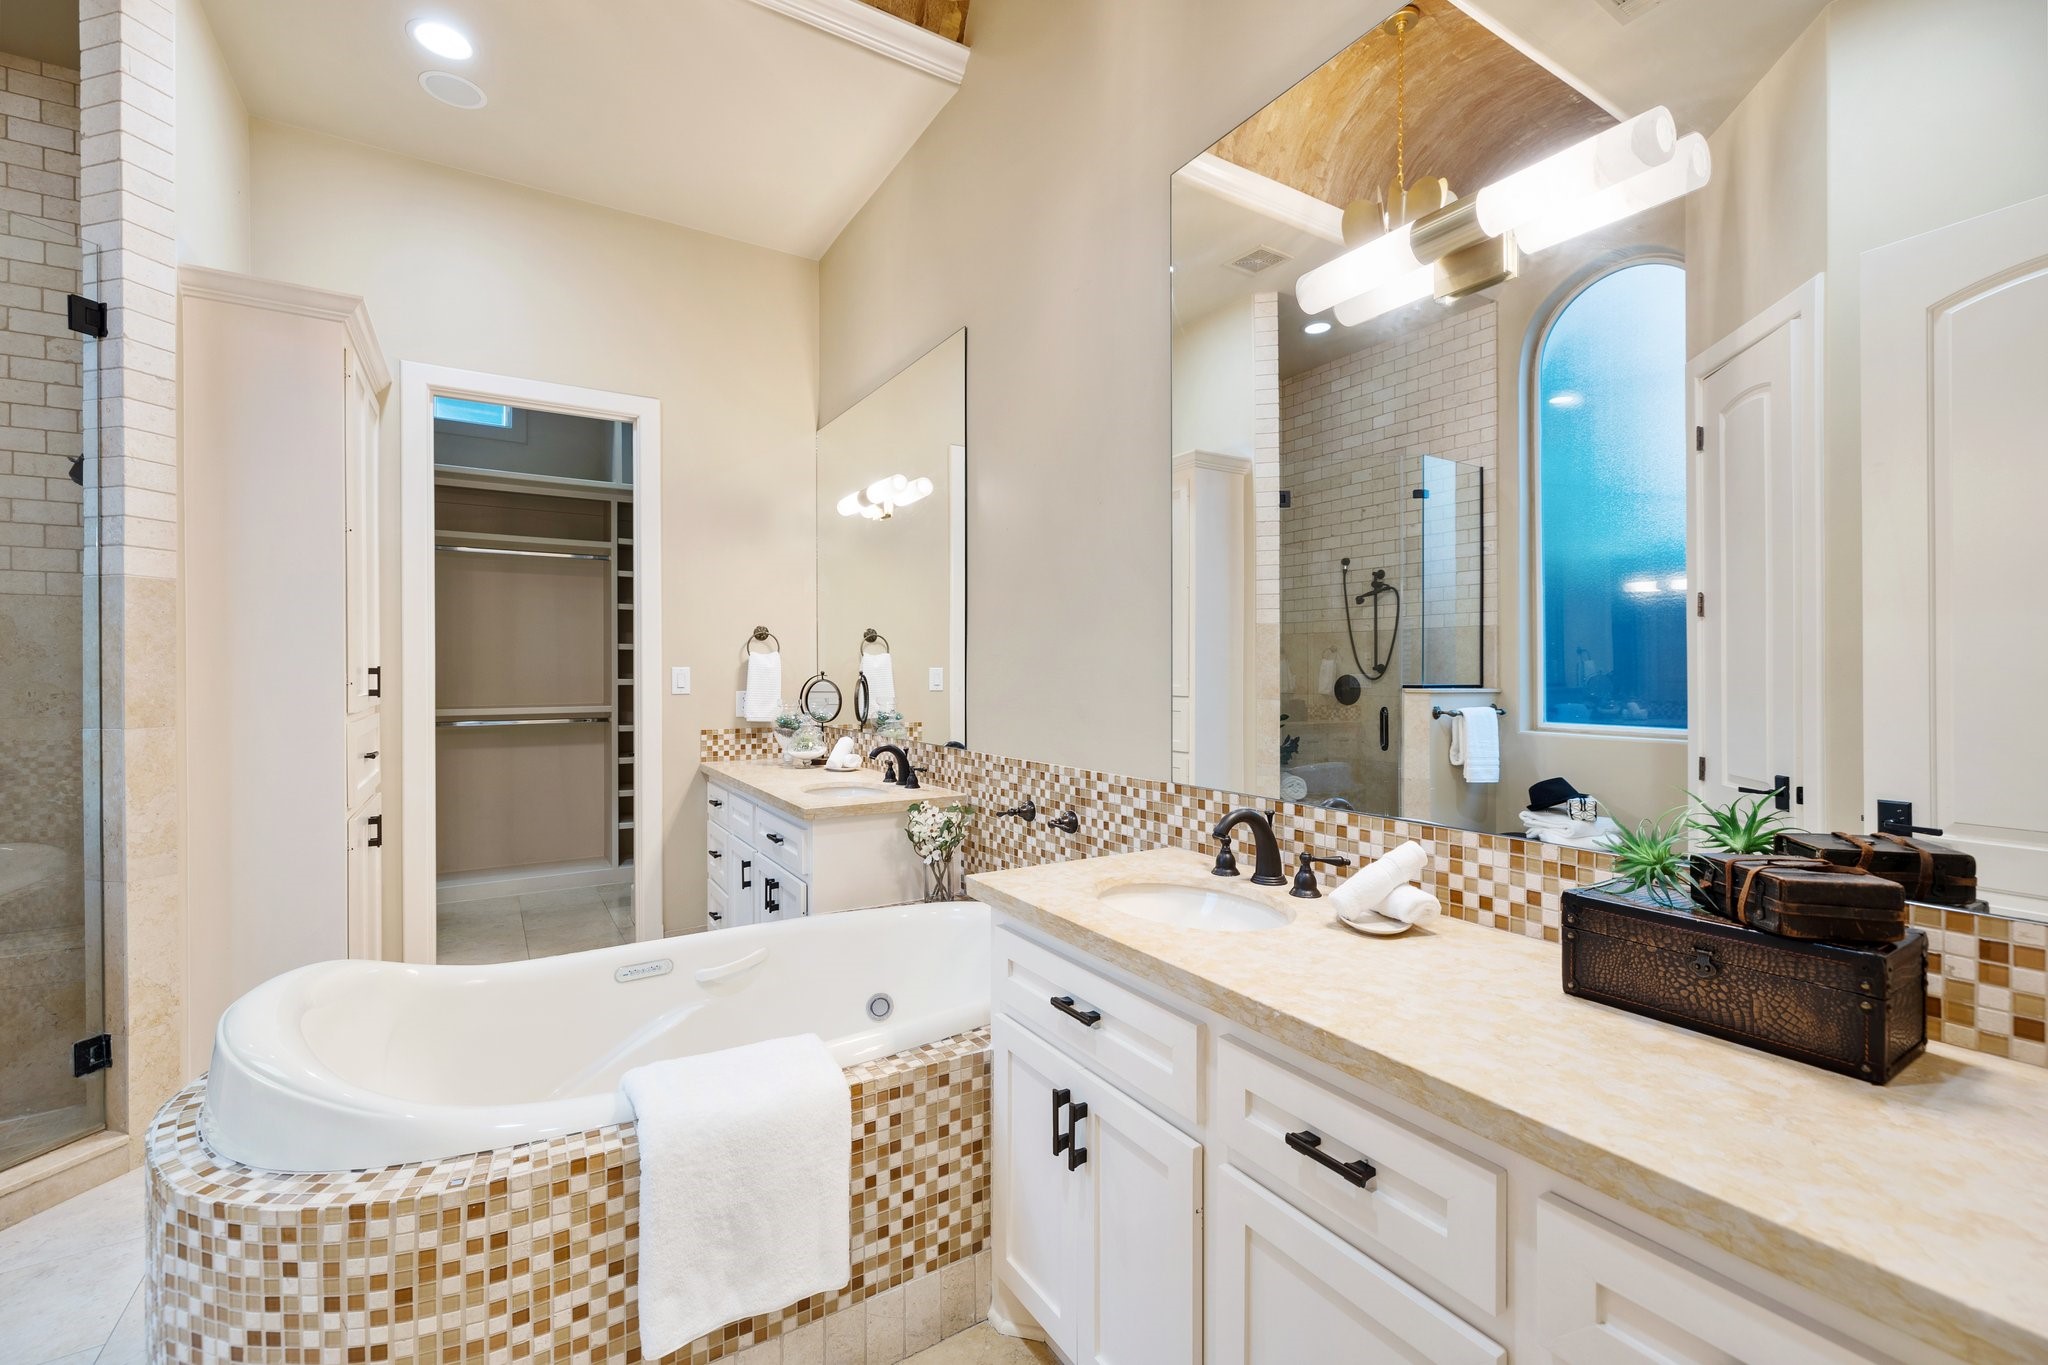 PRIMARY BATHROOM - Luxurious bathroom with leathered stone countertops, air jet tub with tile surround, separate walk-in shower, double vanities and linen storage.